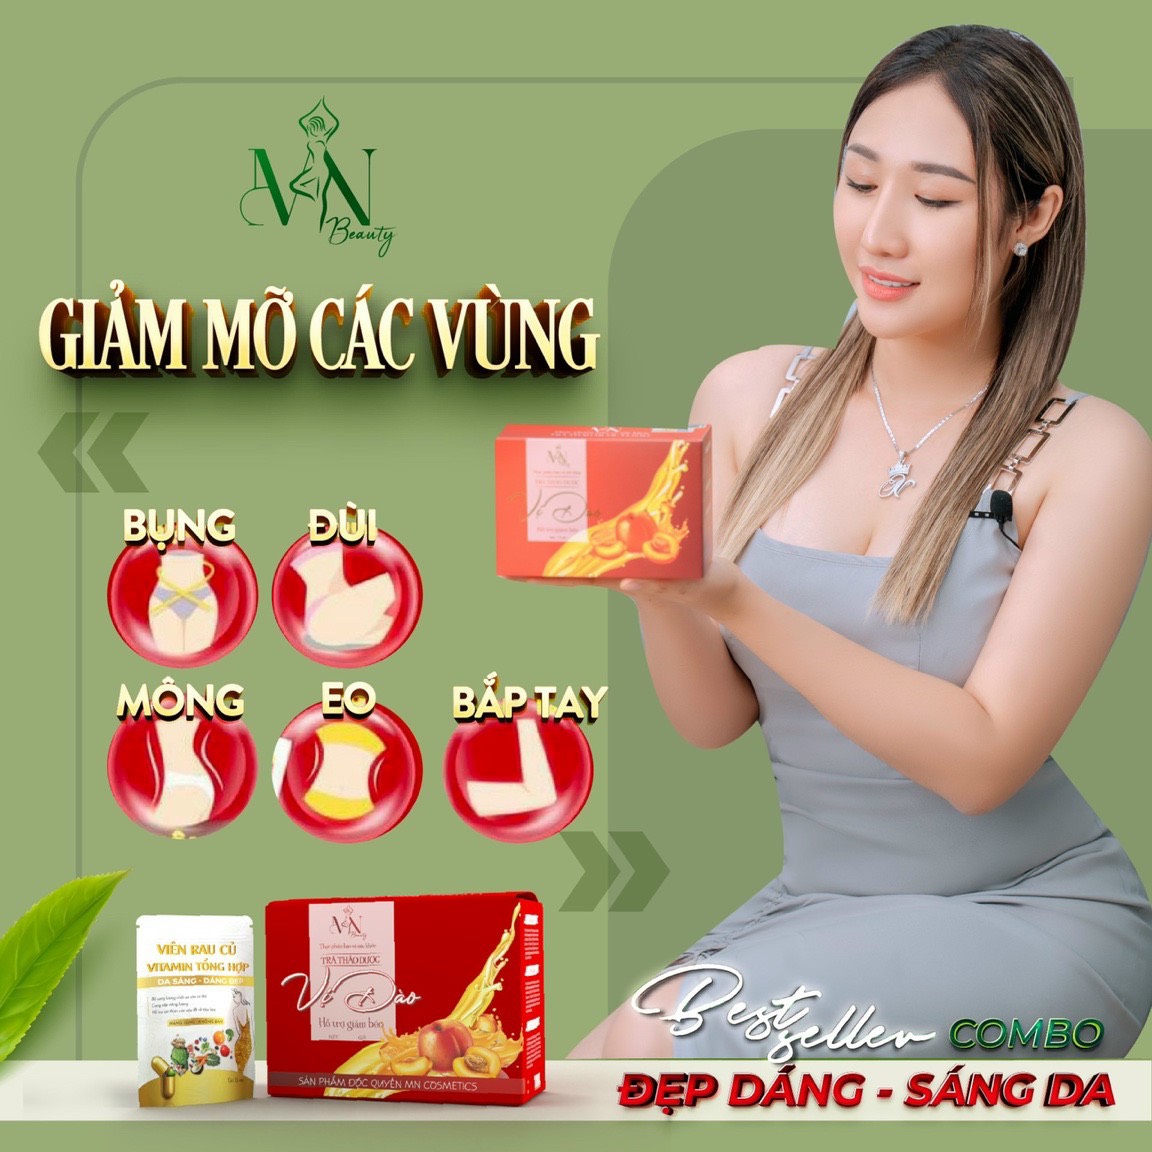 Tra giam can vi dao dong anh 5 1